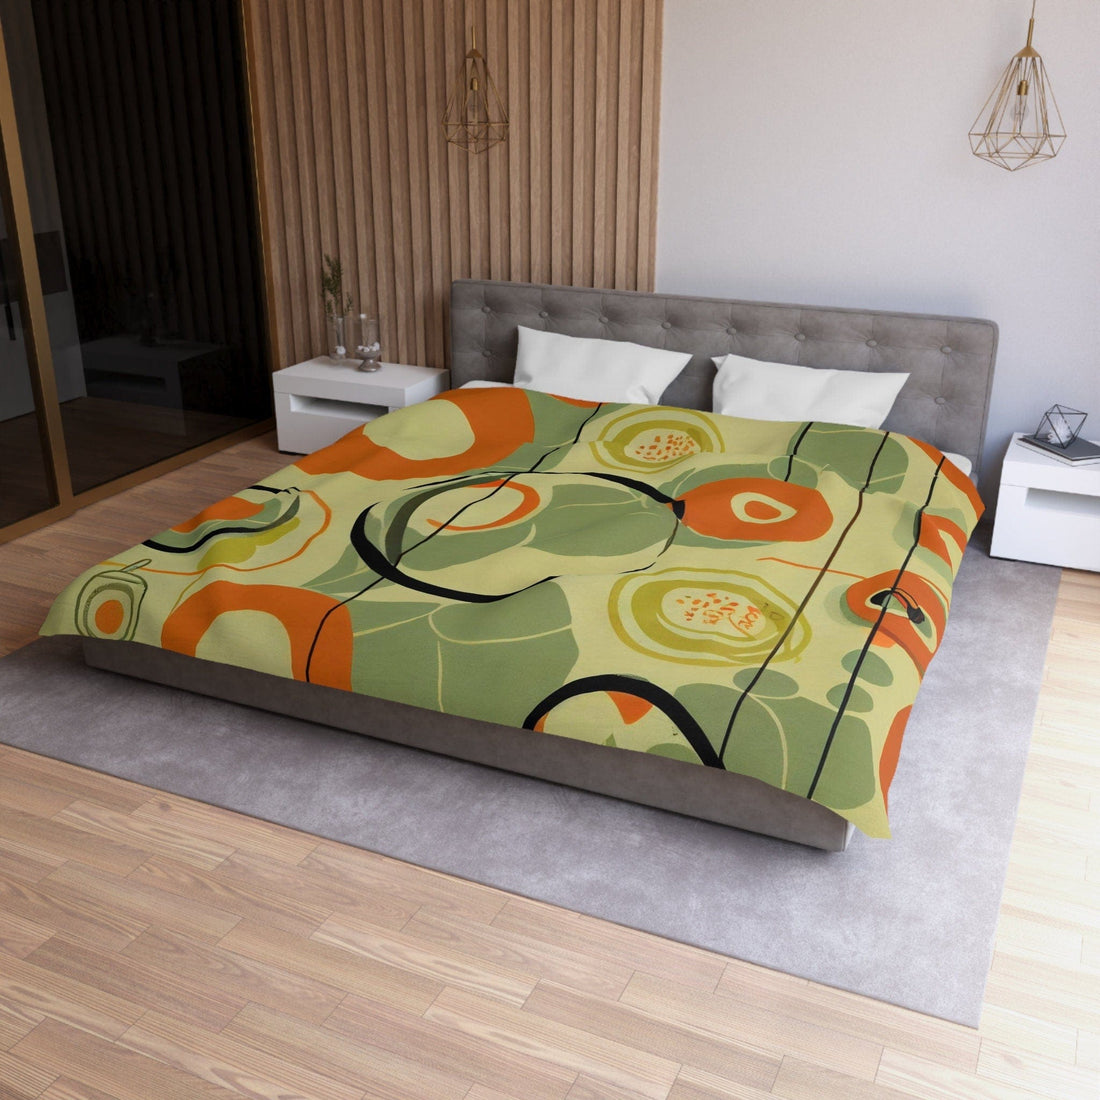 Kate McEnroe New York 70s Mod Abstract Geometric Duvet Cover, Burnt Orange and Green Mid Century Style, Queen, King, Twin, Twin XL Bedding - KM13829923Duvet Covers30652507126637710229